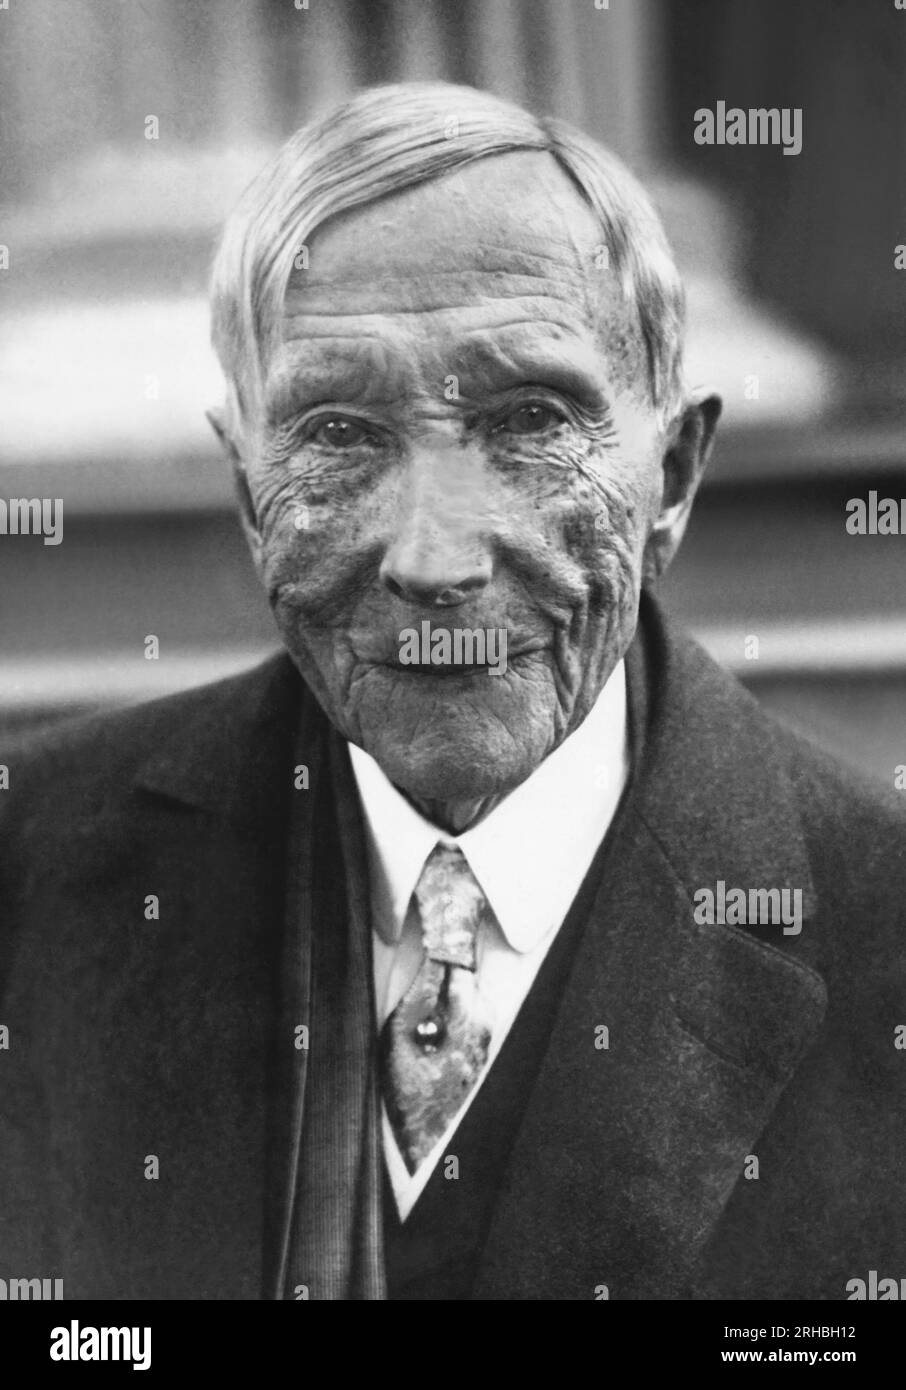 Tarrytown, New York:  July 10, 1927 A portrait of John D. Rockefeller two day safter he celebrated his 88th birthday. Stock Photo